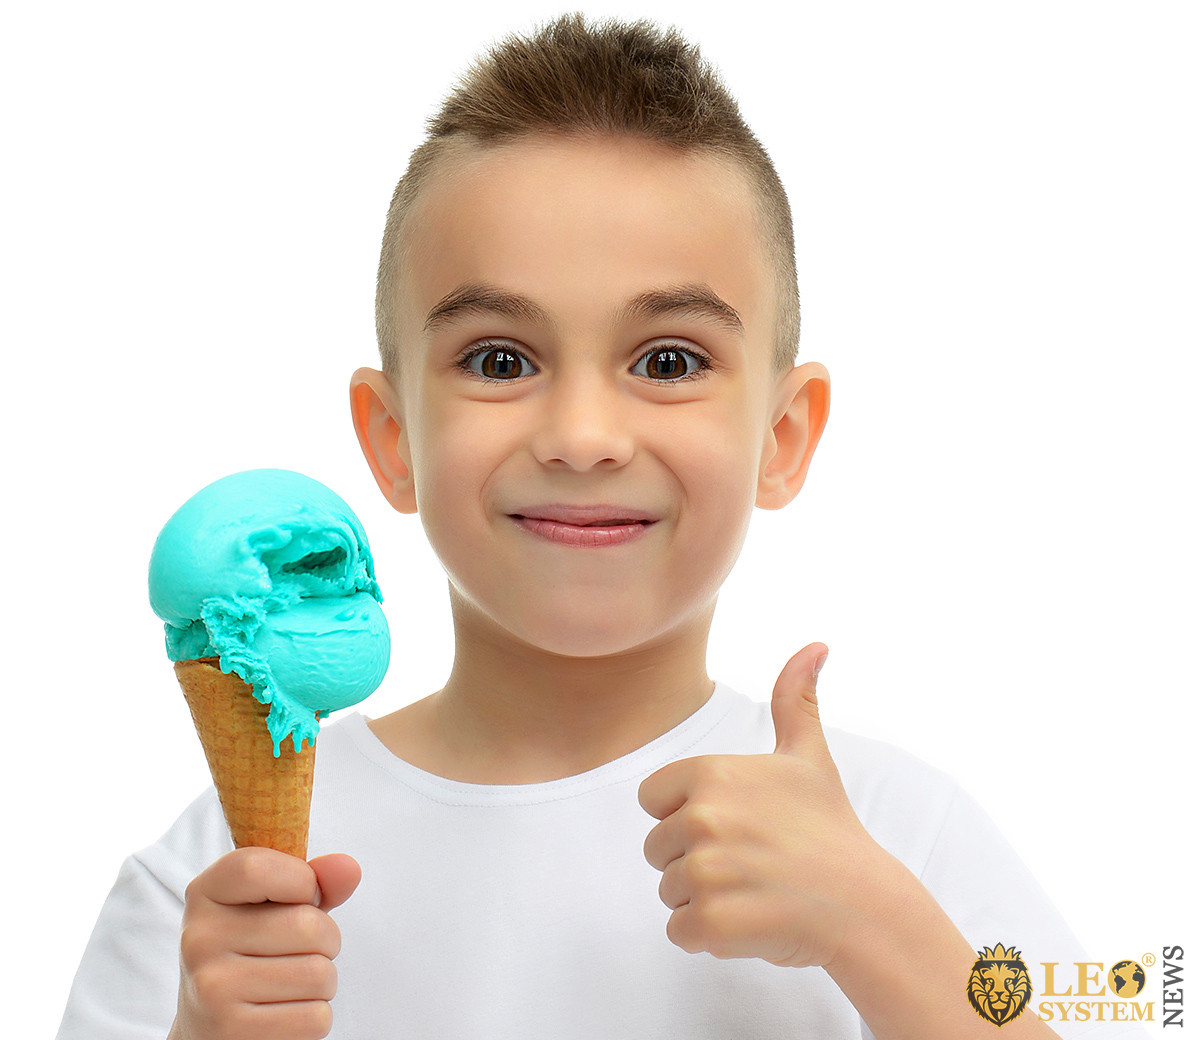 Image of a happy child with ice cream in his hands